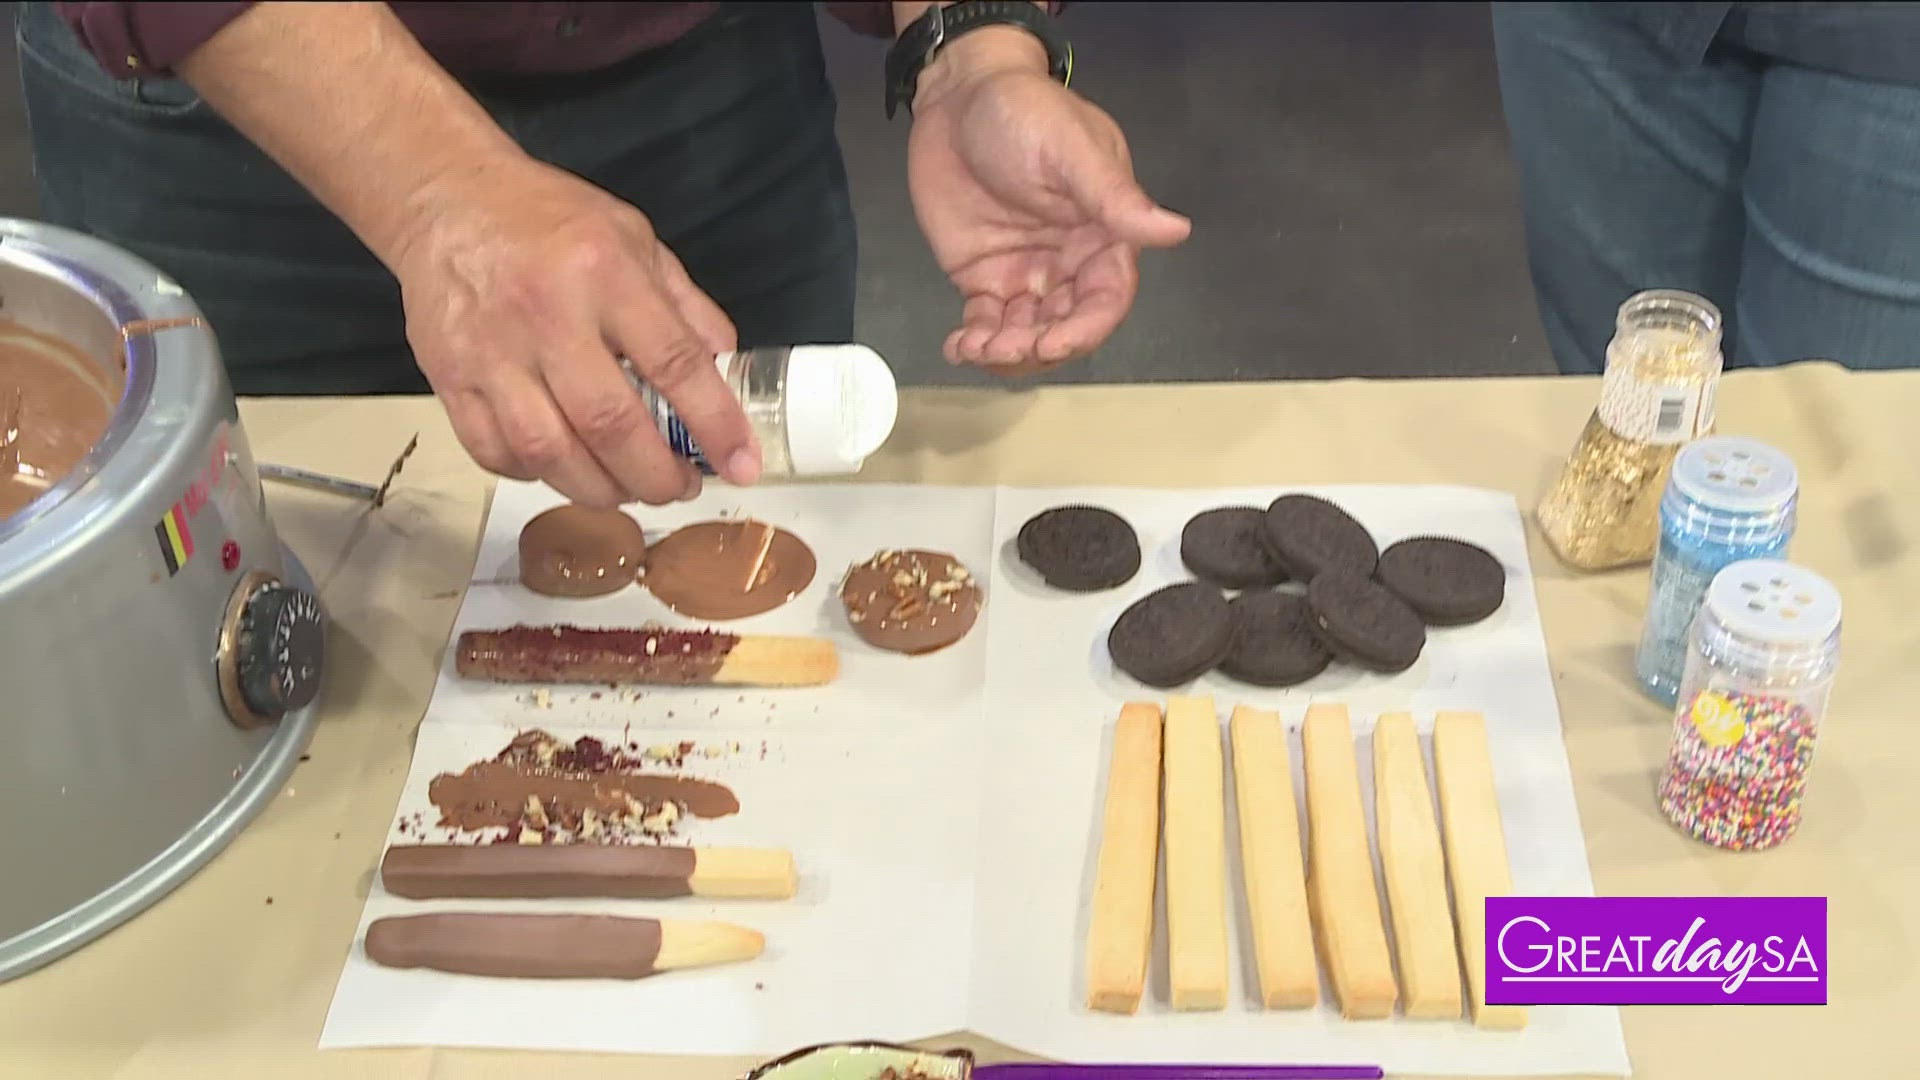 Paul helps make some yummy treats with Pastry Chef Alessia Benavides of Chocolatl.